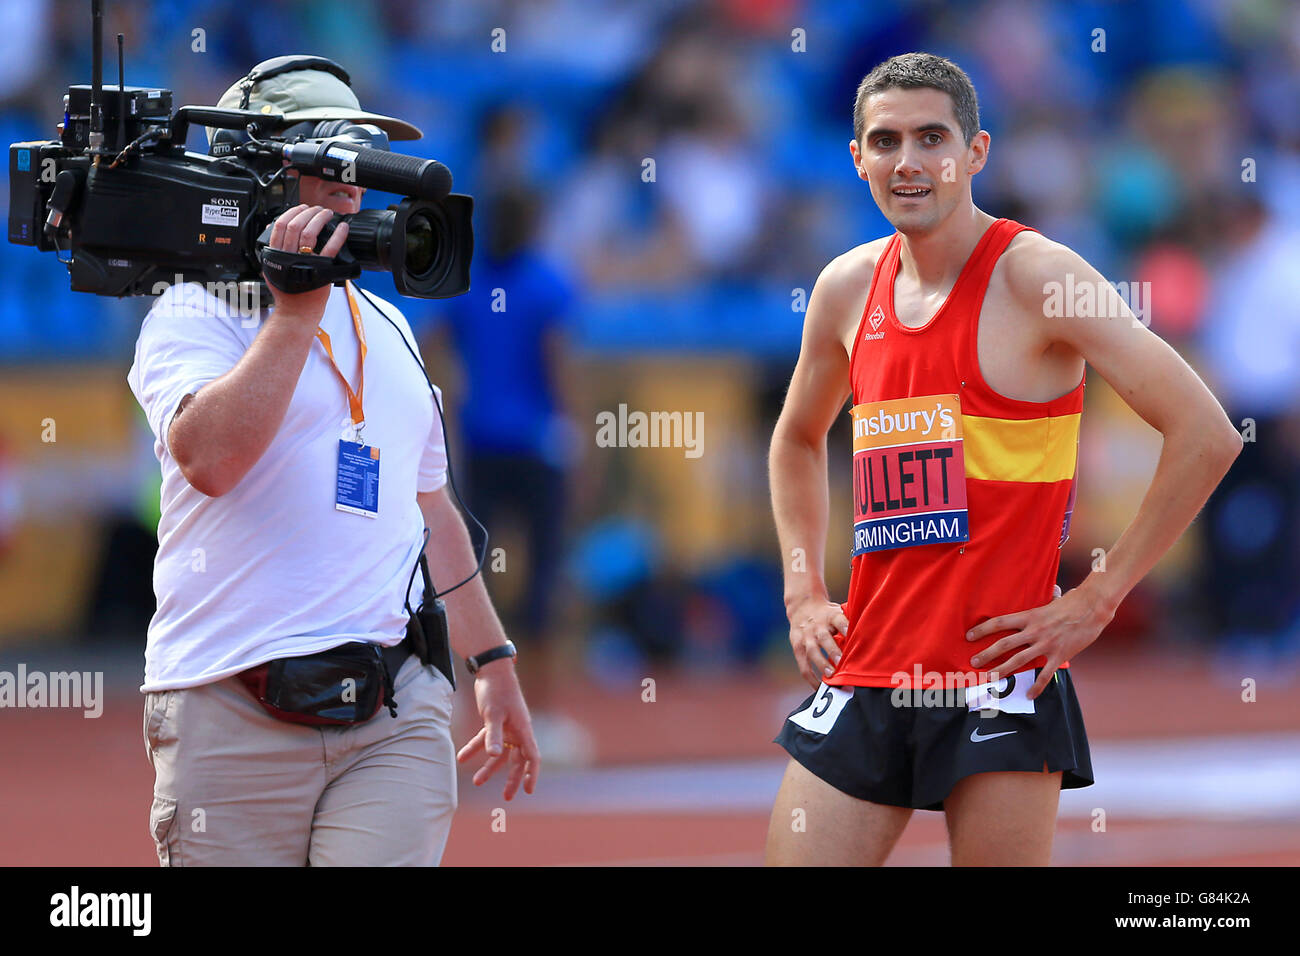 Athletics - 2015 Sainsbury's British Championships - Day One - Alexander Stadium. Rob Mullett (Lewes) after the Mens 3000m Steeplechase final. Stock Photo